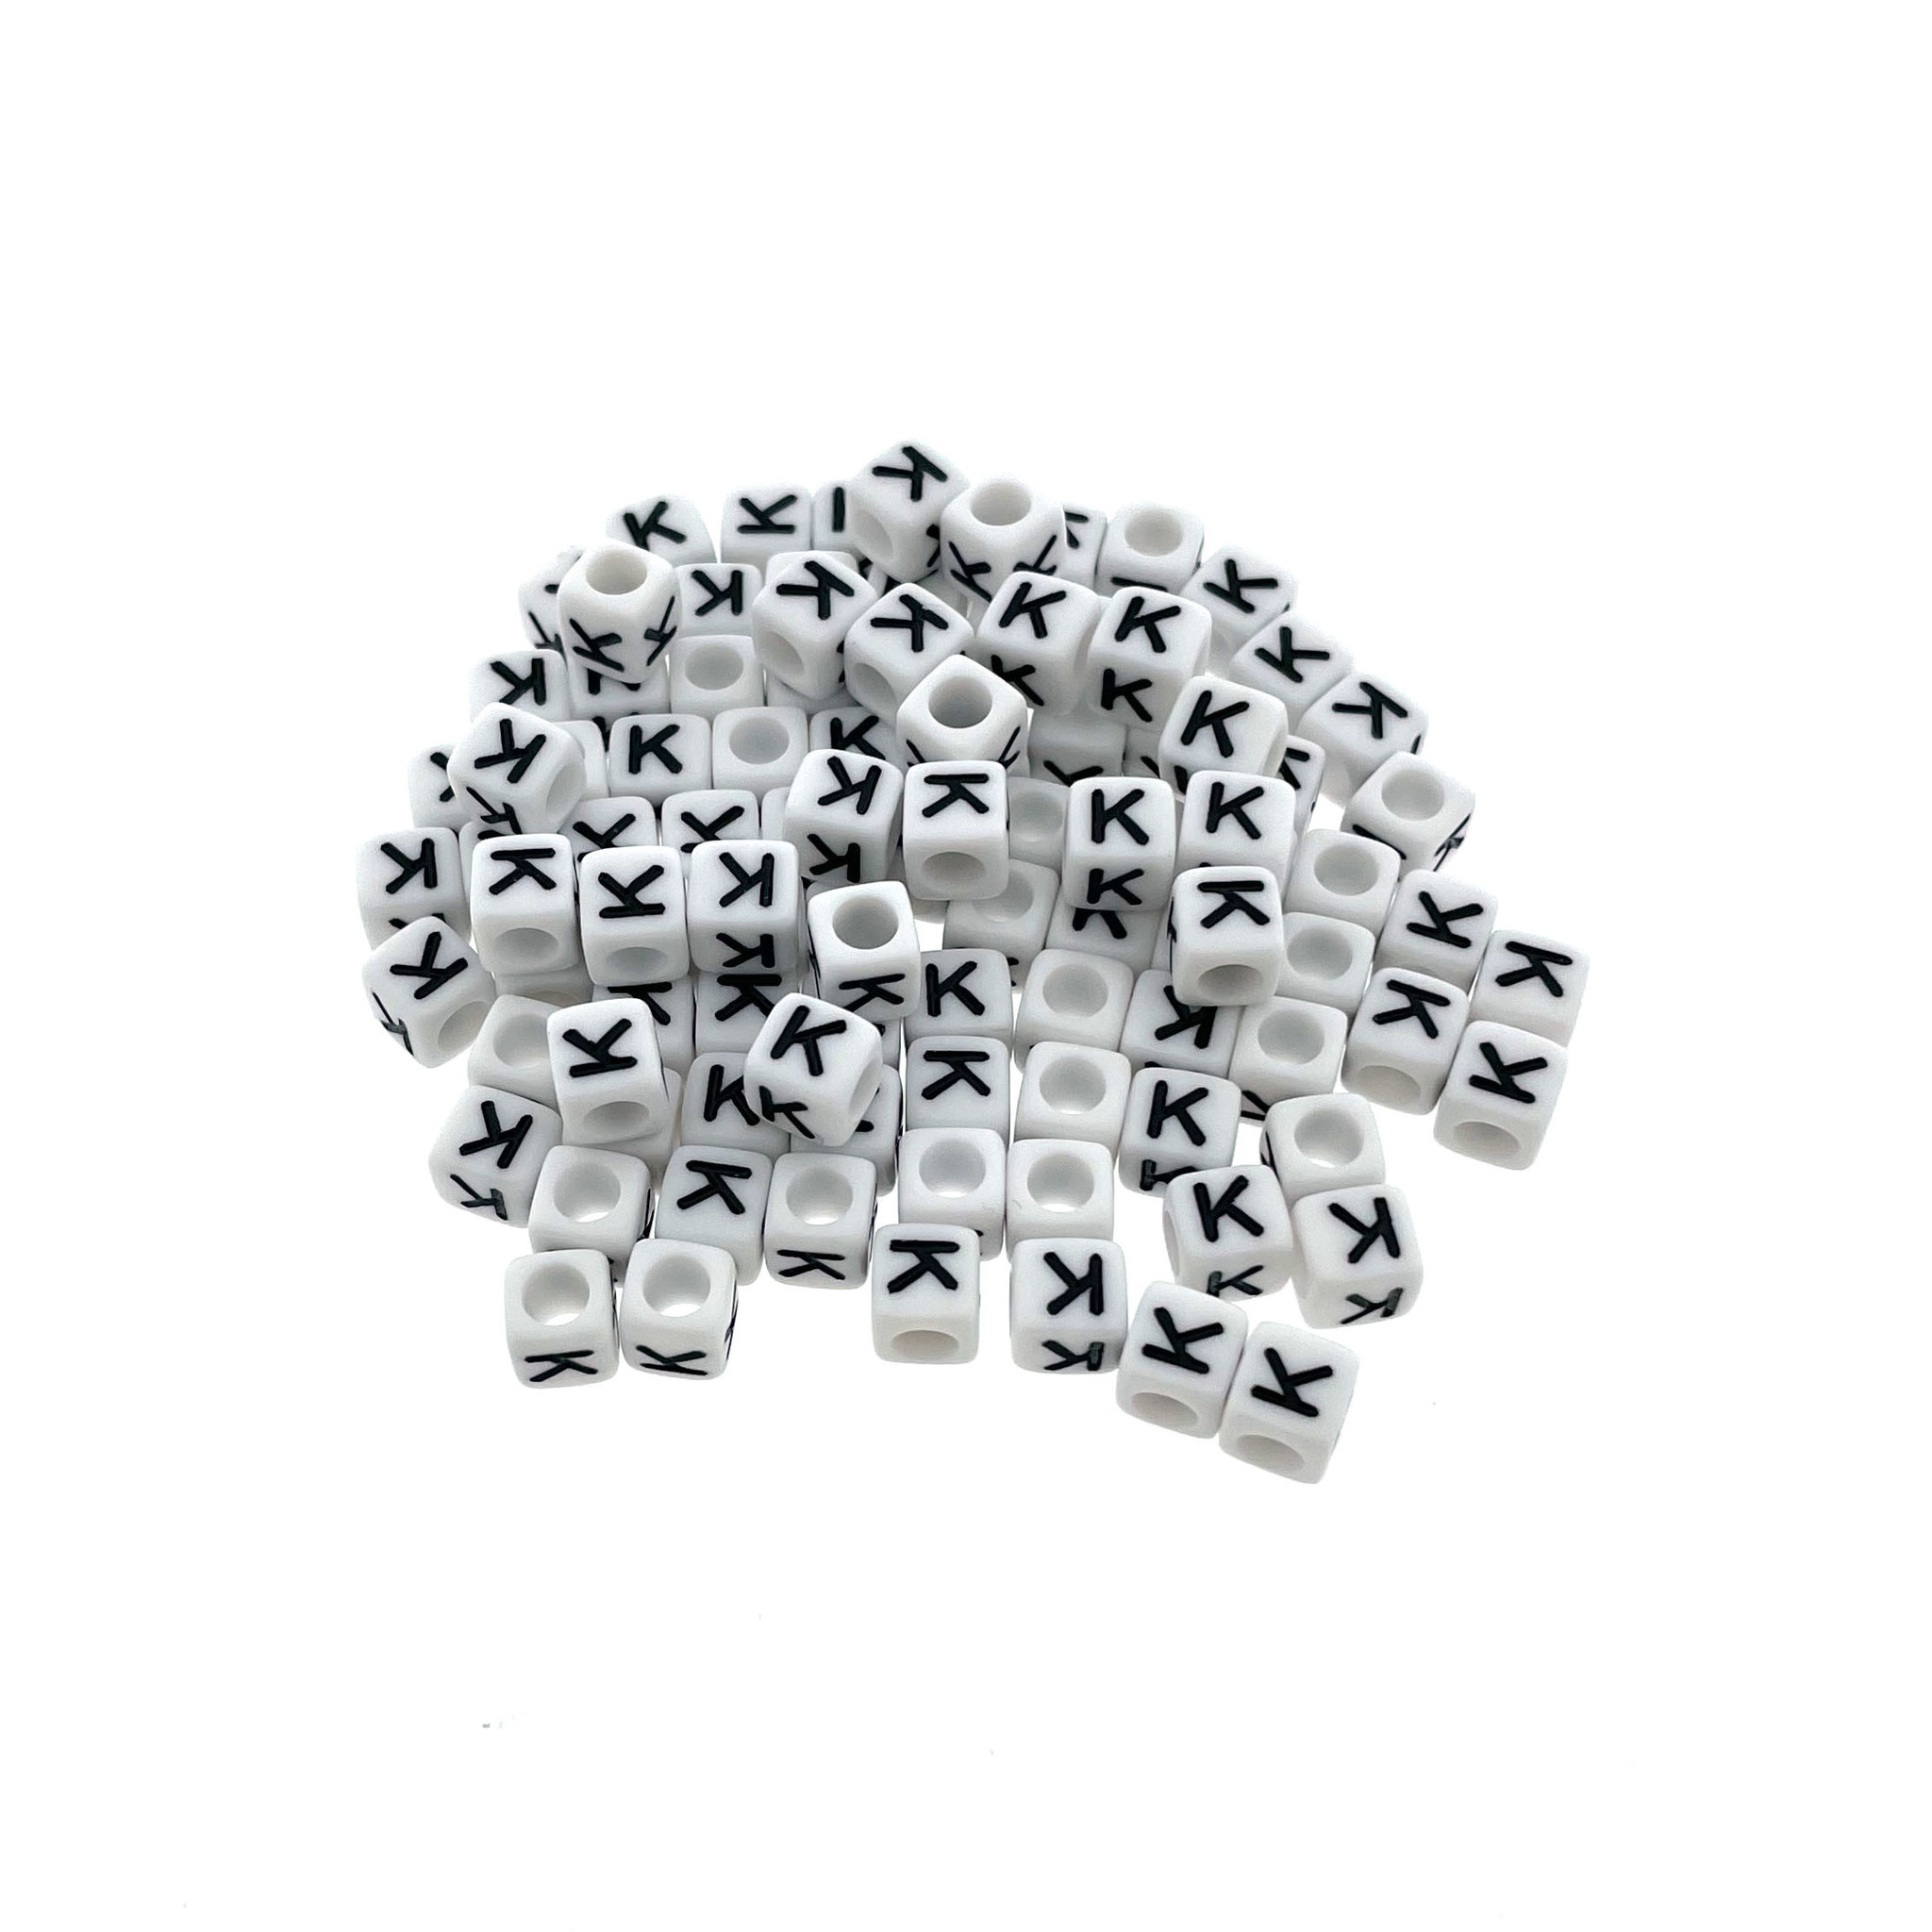 Buy Paracord alphabet letter beads White P at 123Paracord